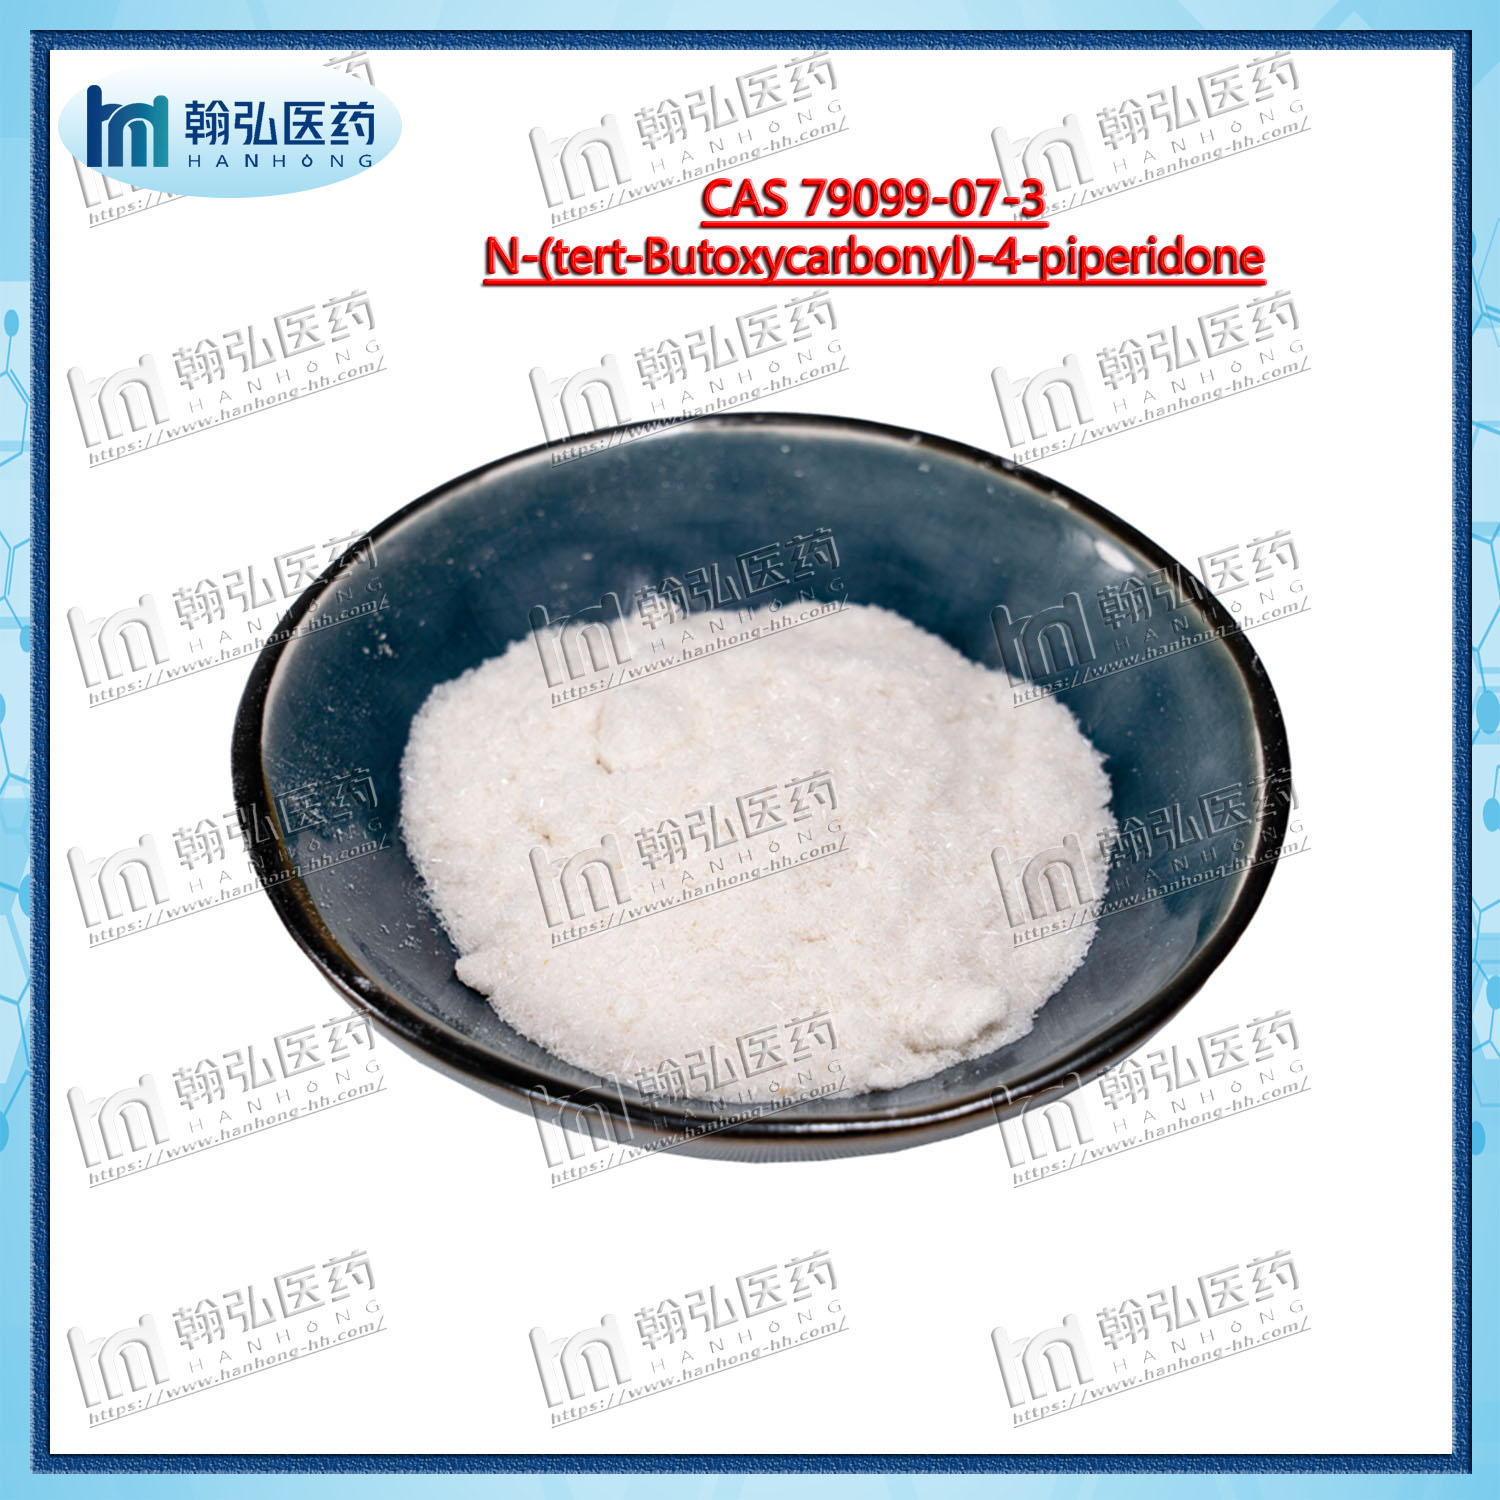 Competitive Price CAS 79099-07-3 1-Boc-4-Piperidone CAS No. 79099-07-3 (WhatsApp/WeChat: +8615927457486 WickrMe: Ccassie